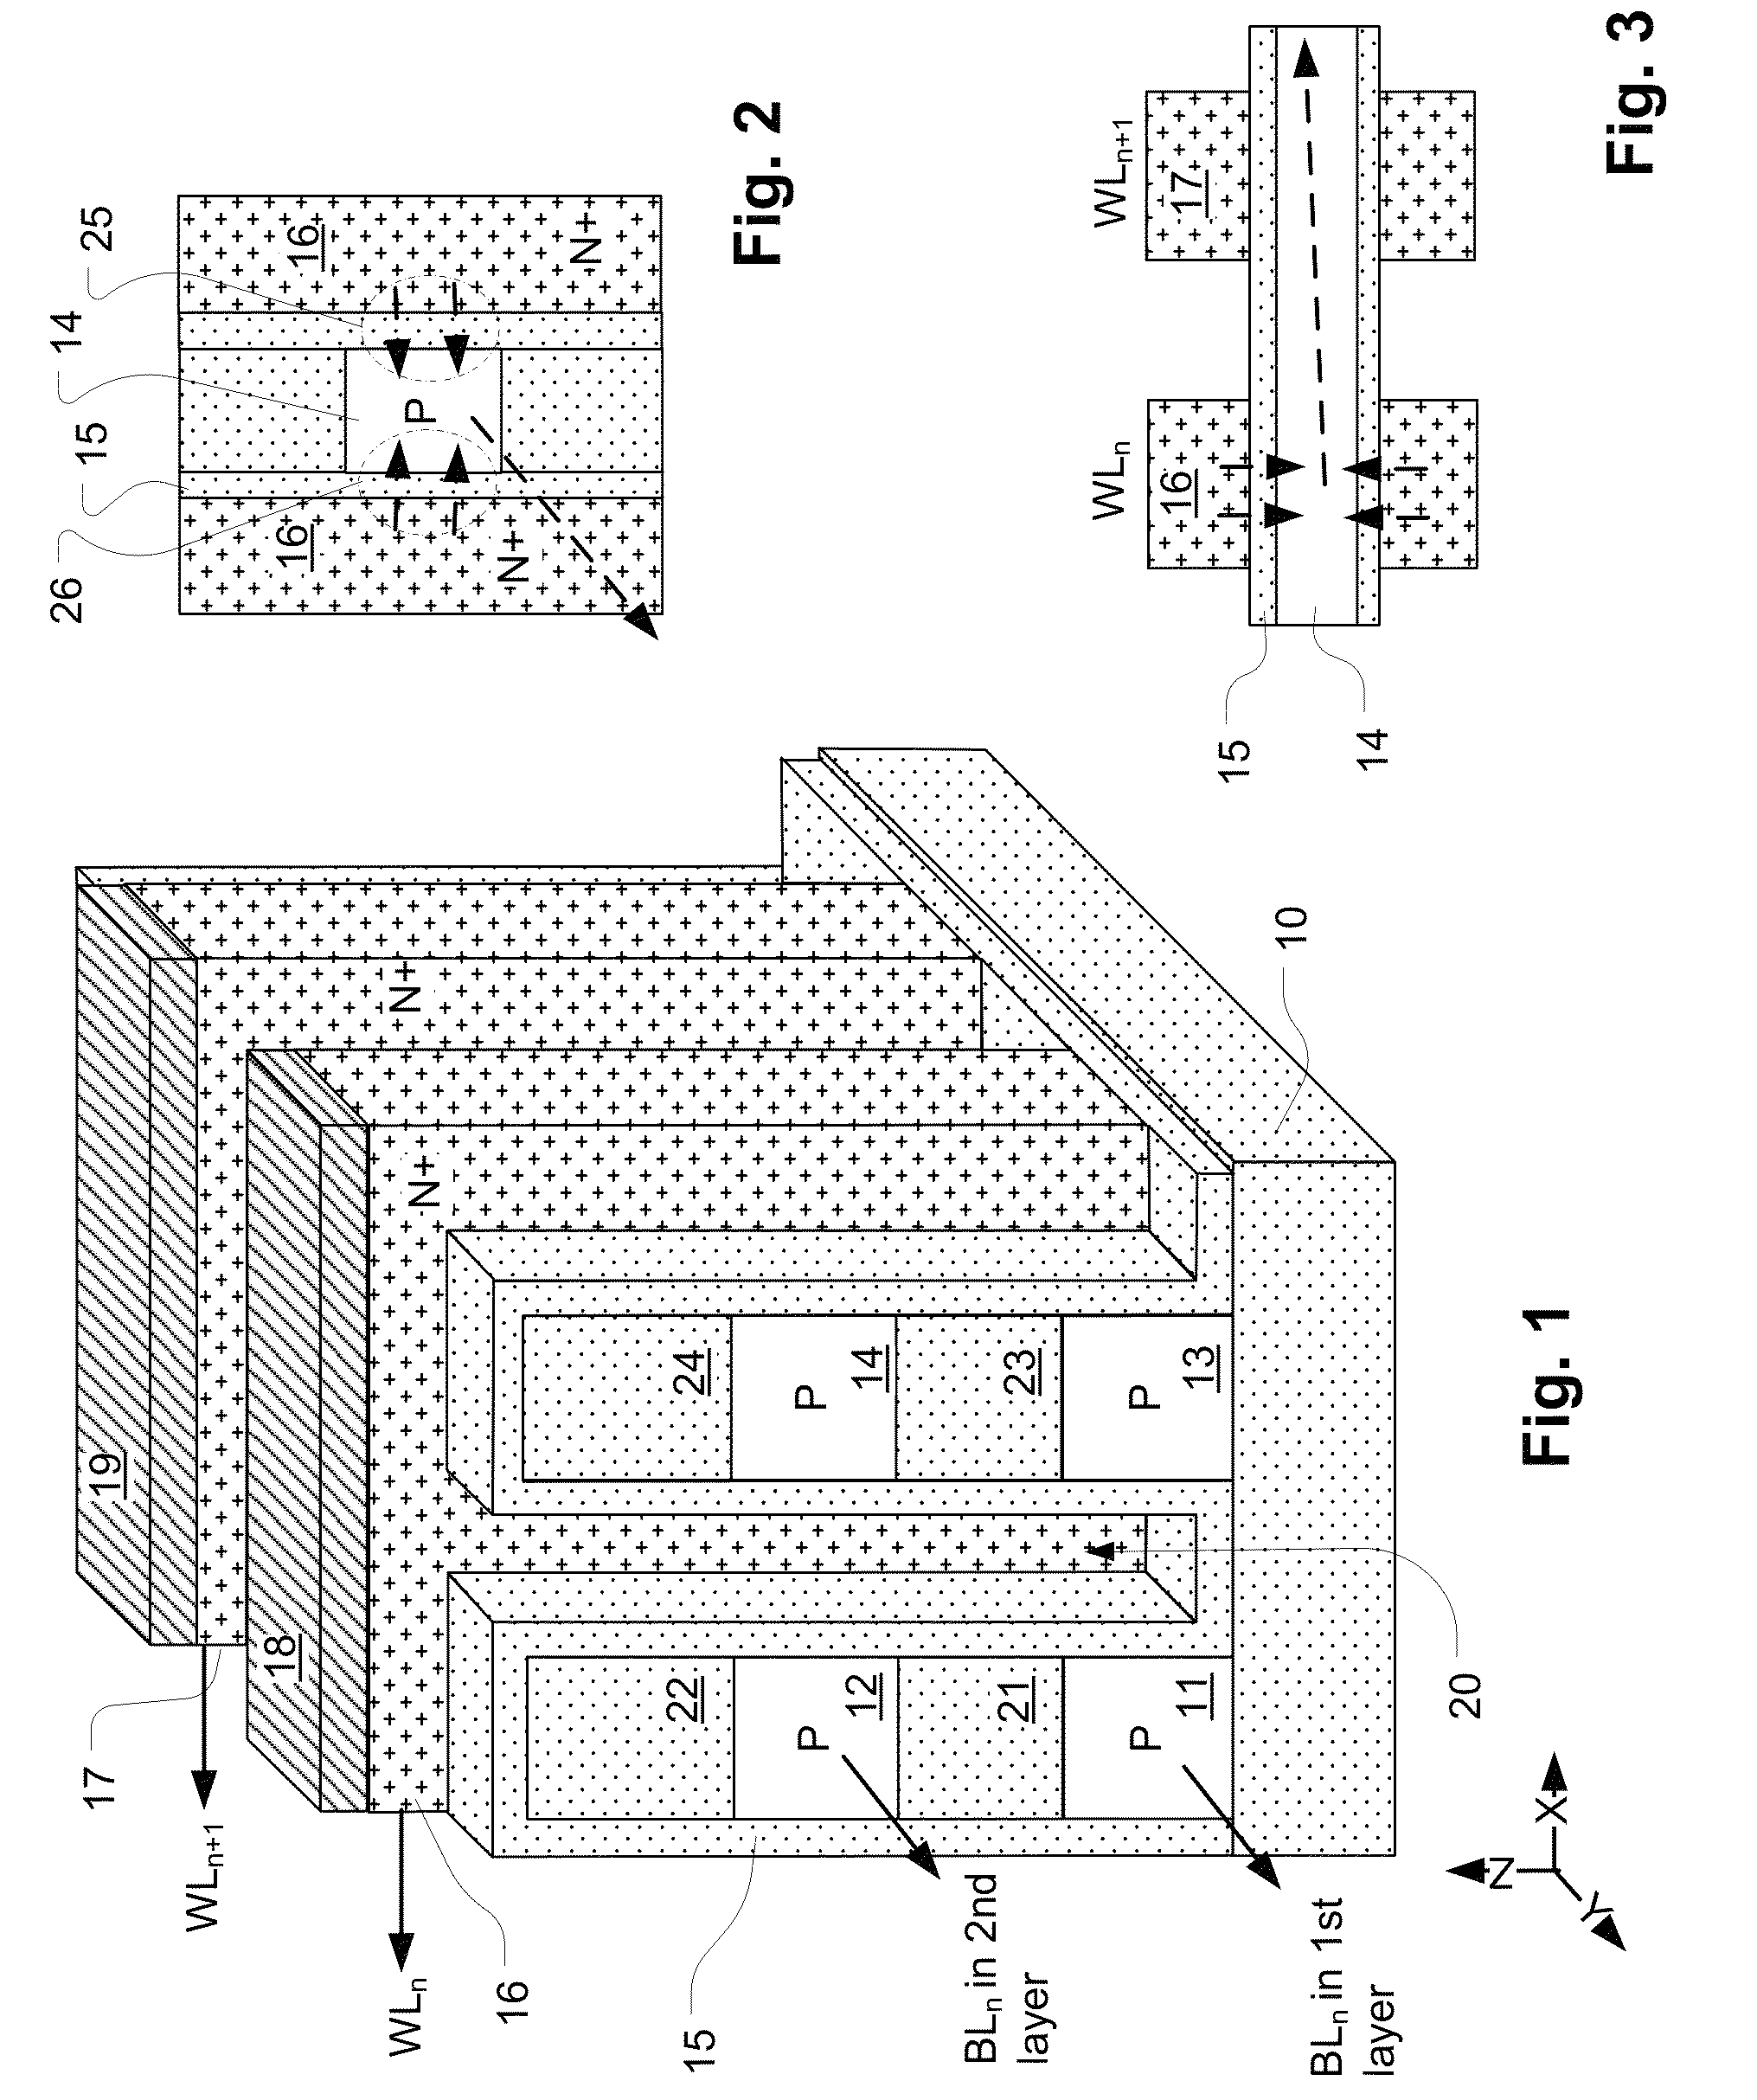 Memory architecture of 3D array with improved uniformity of bit line capacitances